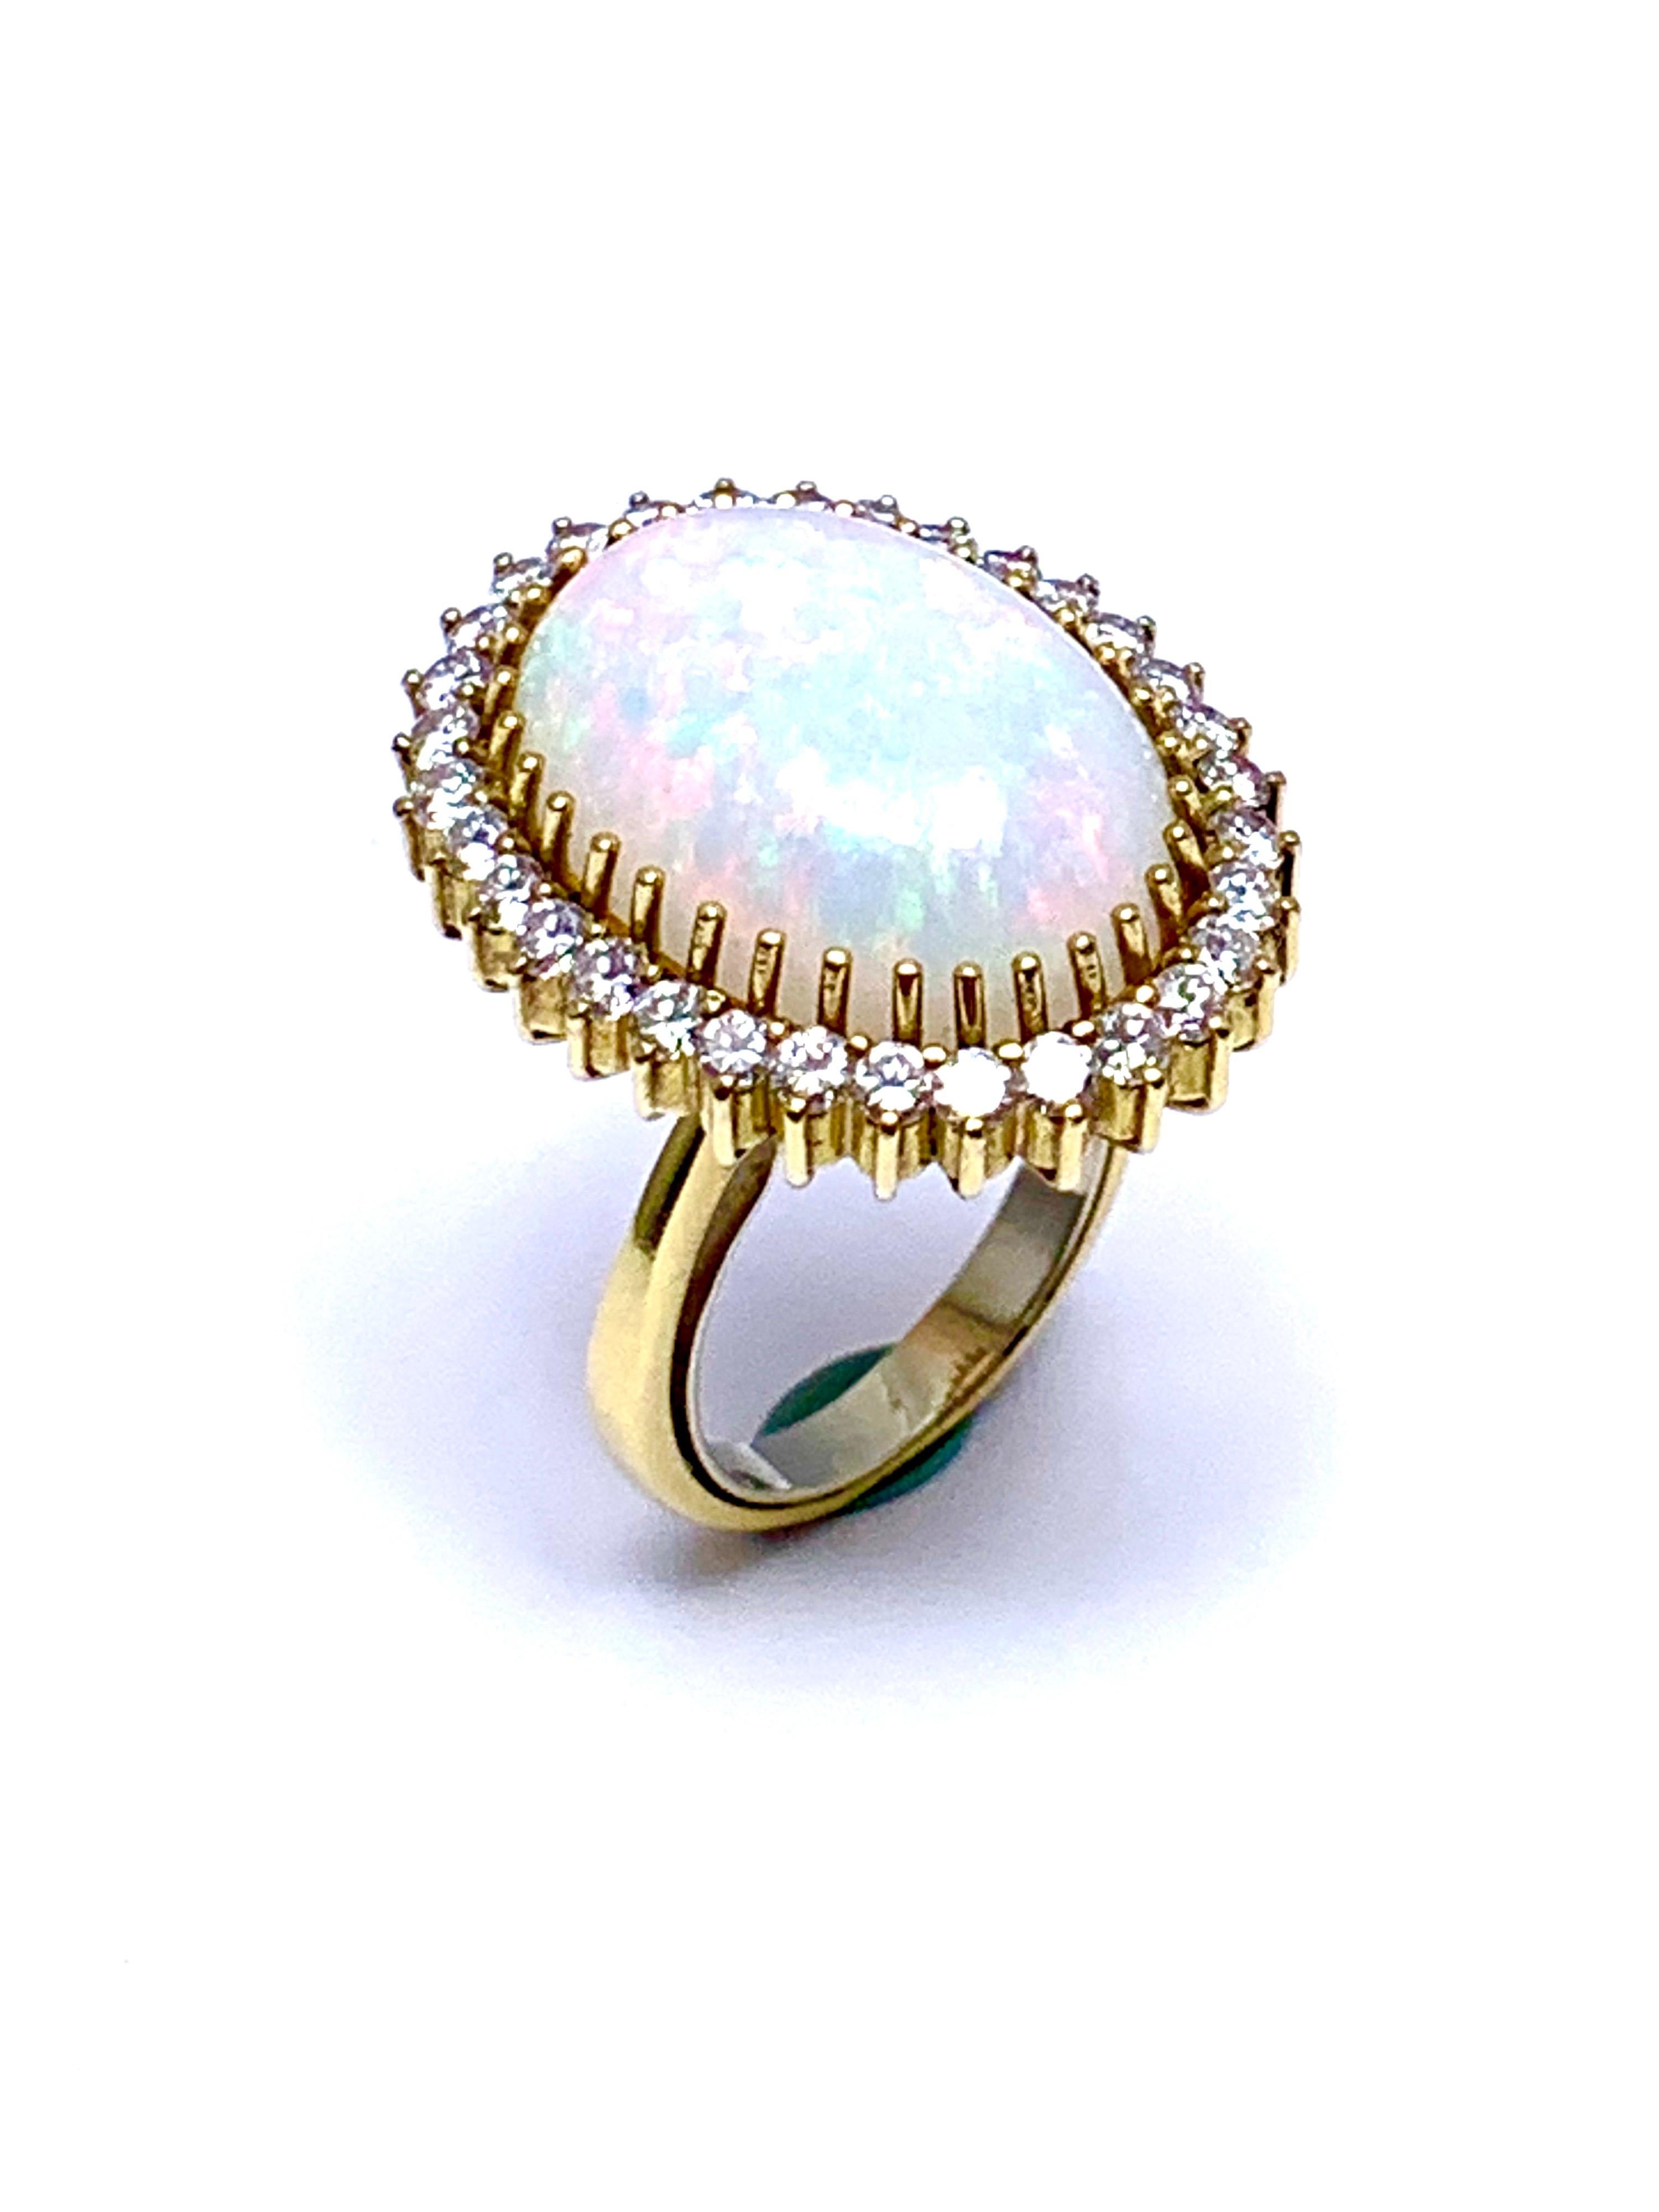 A beautiful oval cabochon White Opal and round brilliant Diamond cocktail ring.  The 6.16 carat Opal is prong set with a single row of diamonds surrounding,  The diamonds are graded as G color, VS clarity, combining for a total weight of 0.30